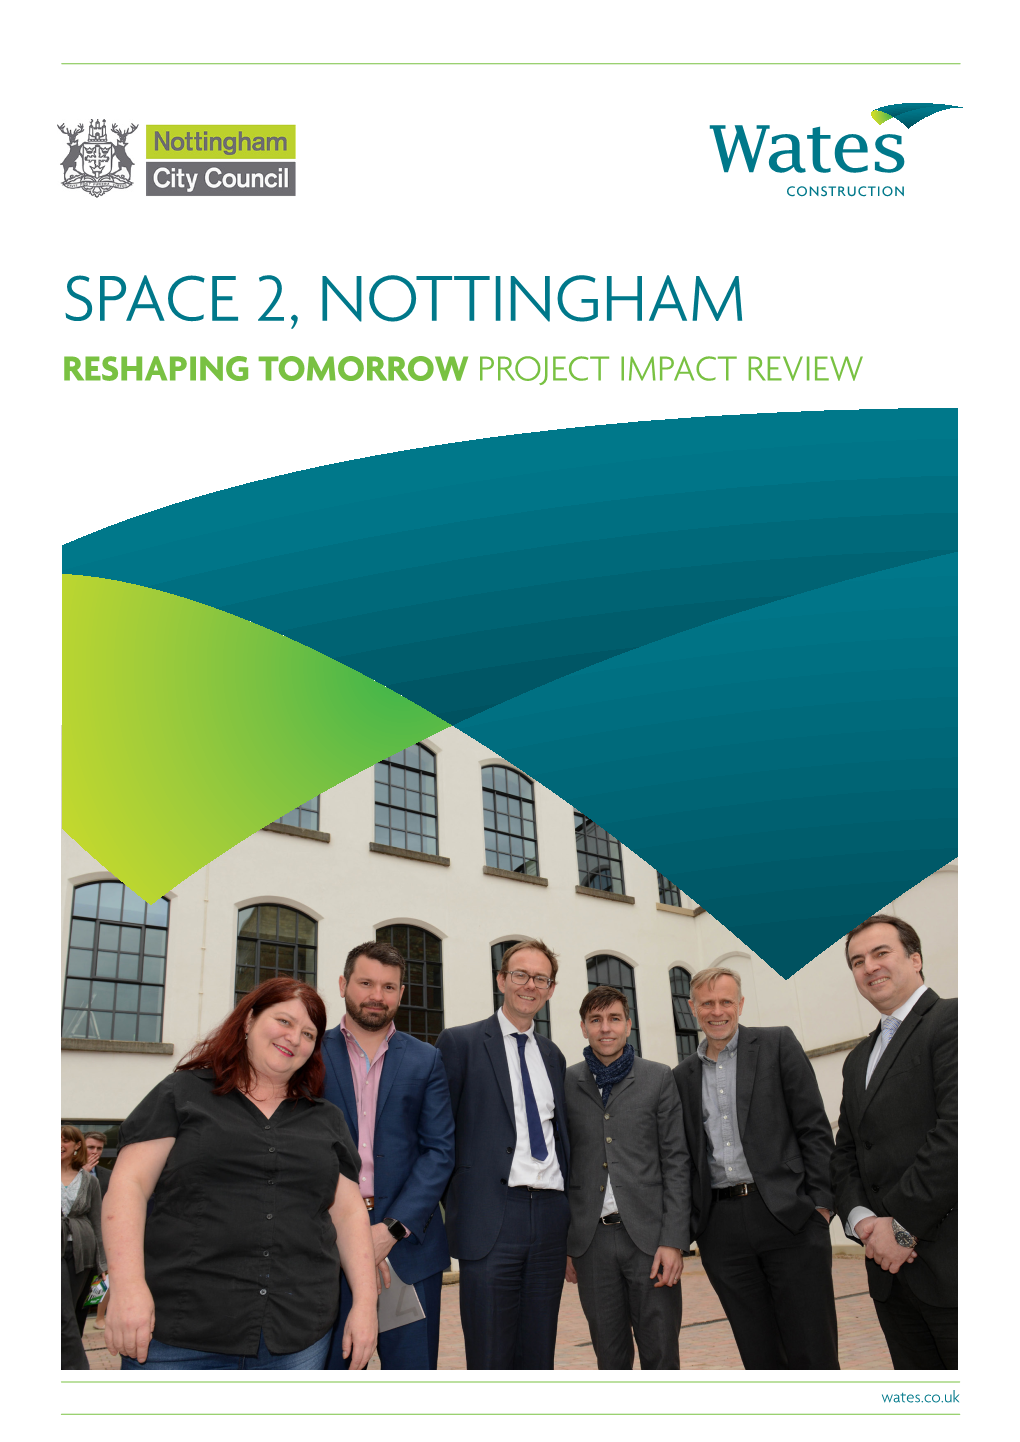 Space 2, Nottingham Reshaping Tomorrow Project Impact Review